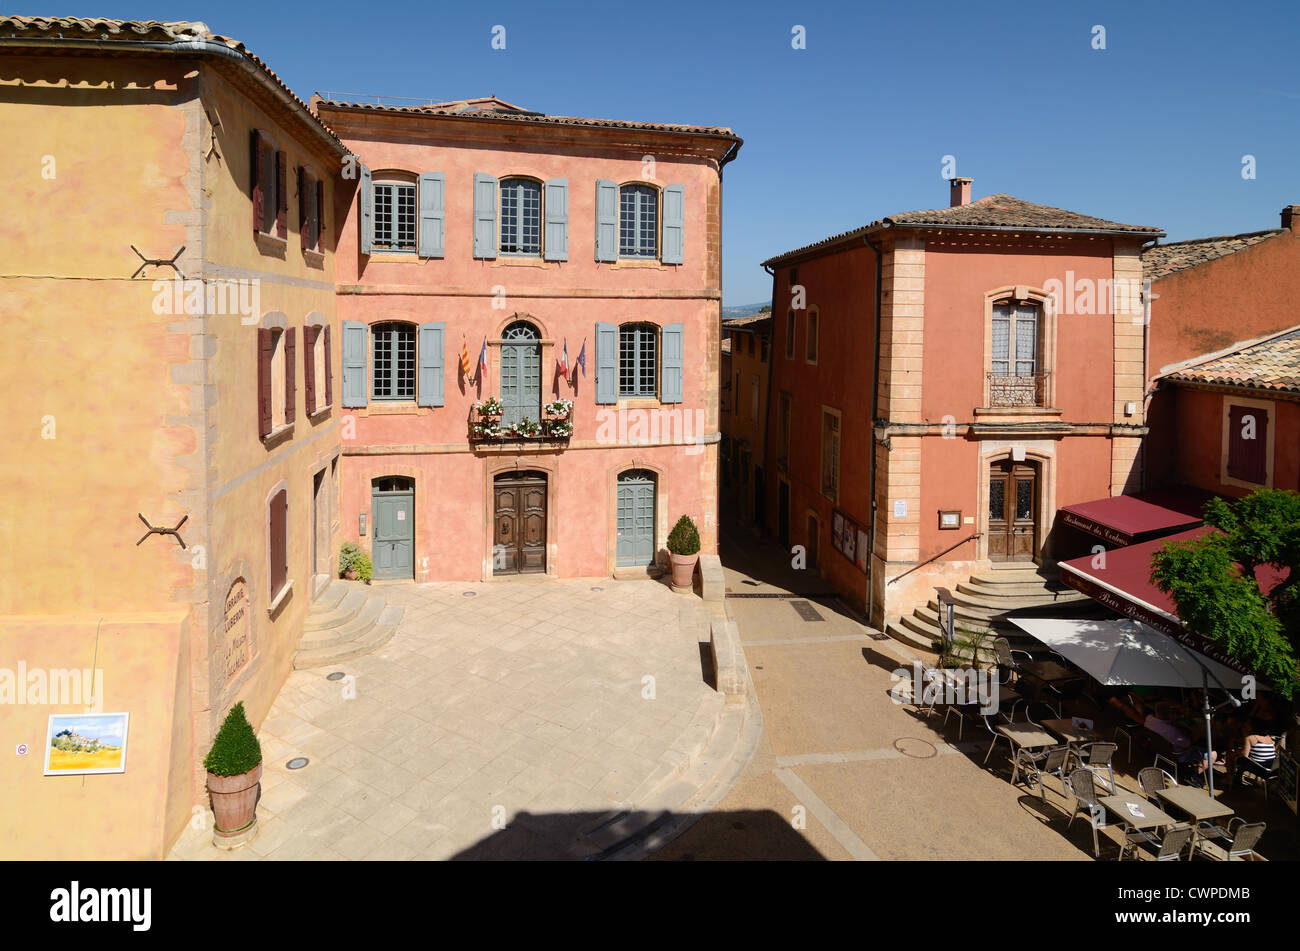 Town Square or Village Square with Town Hall or Mairie in the Old Town or Village of Roussillon Luberon Regional Park Vaucluse Provence France Stock Photo